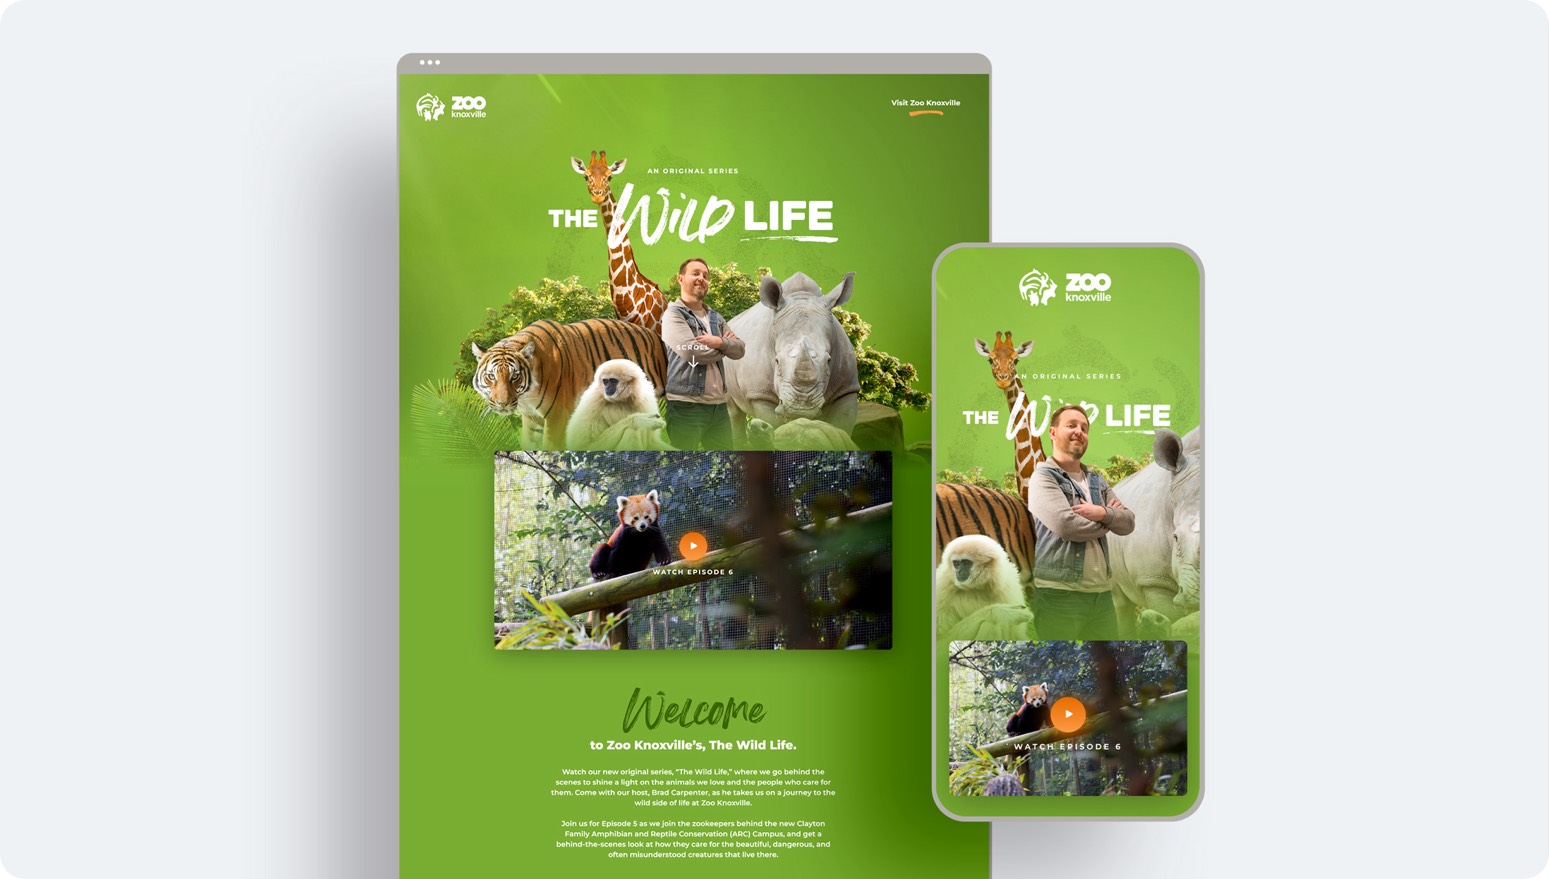 The Wild Life campaign website